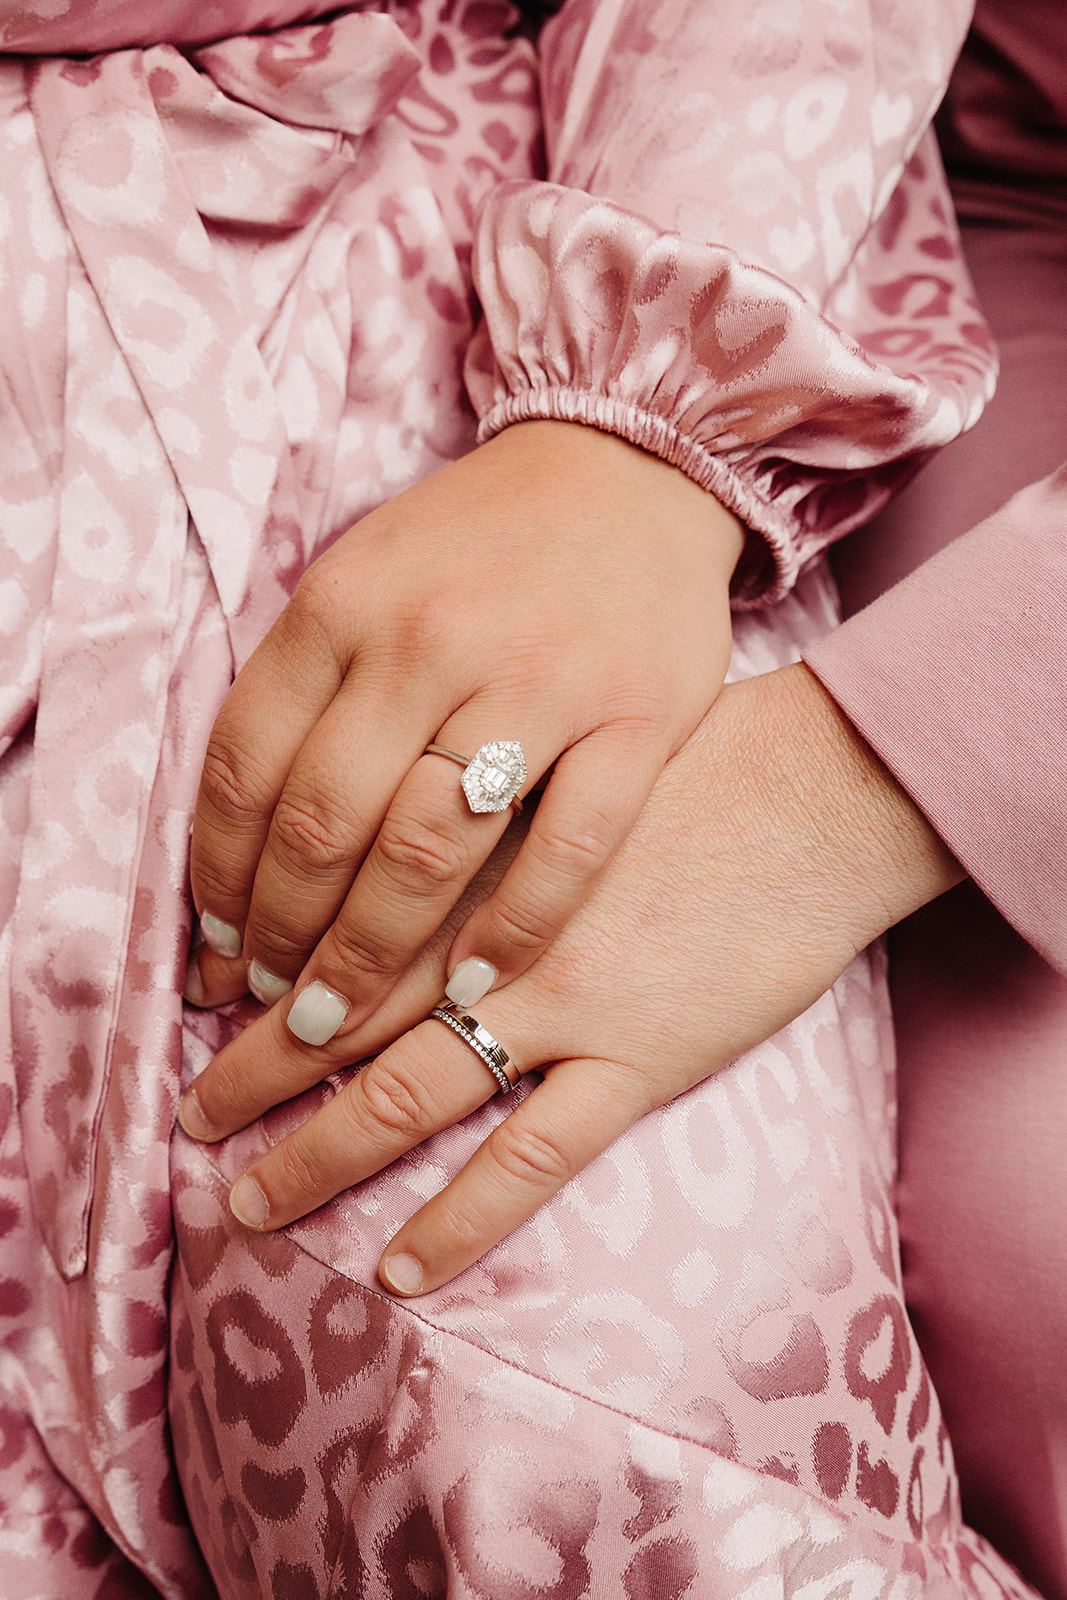 Women holding hands showing their vintage engagement rings during their city engagement session